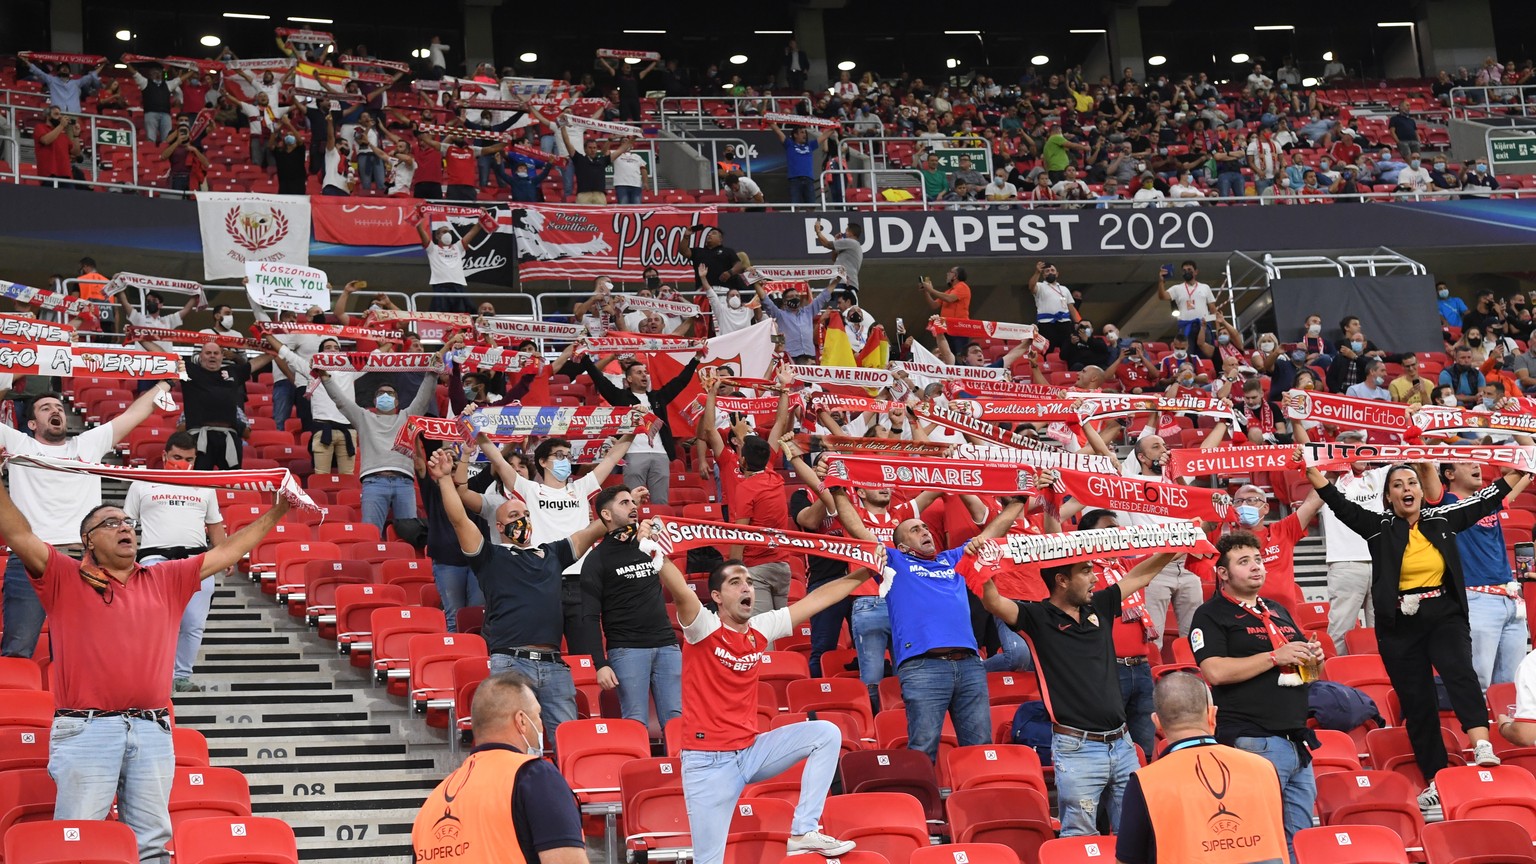 during the UEFA Super Cup soccer match between Bayern Munich and Sevilla at the Puskas Arena in Budapest, Hungary, Thursday, Sept. 24, 2020. (Tibor Ilyes/Pool via AP)